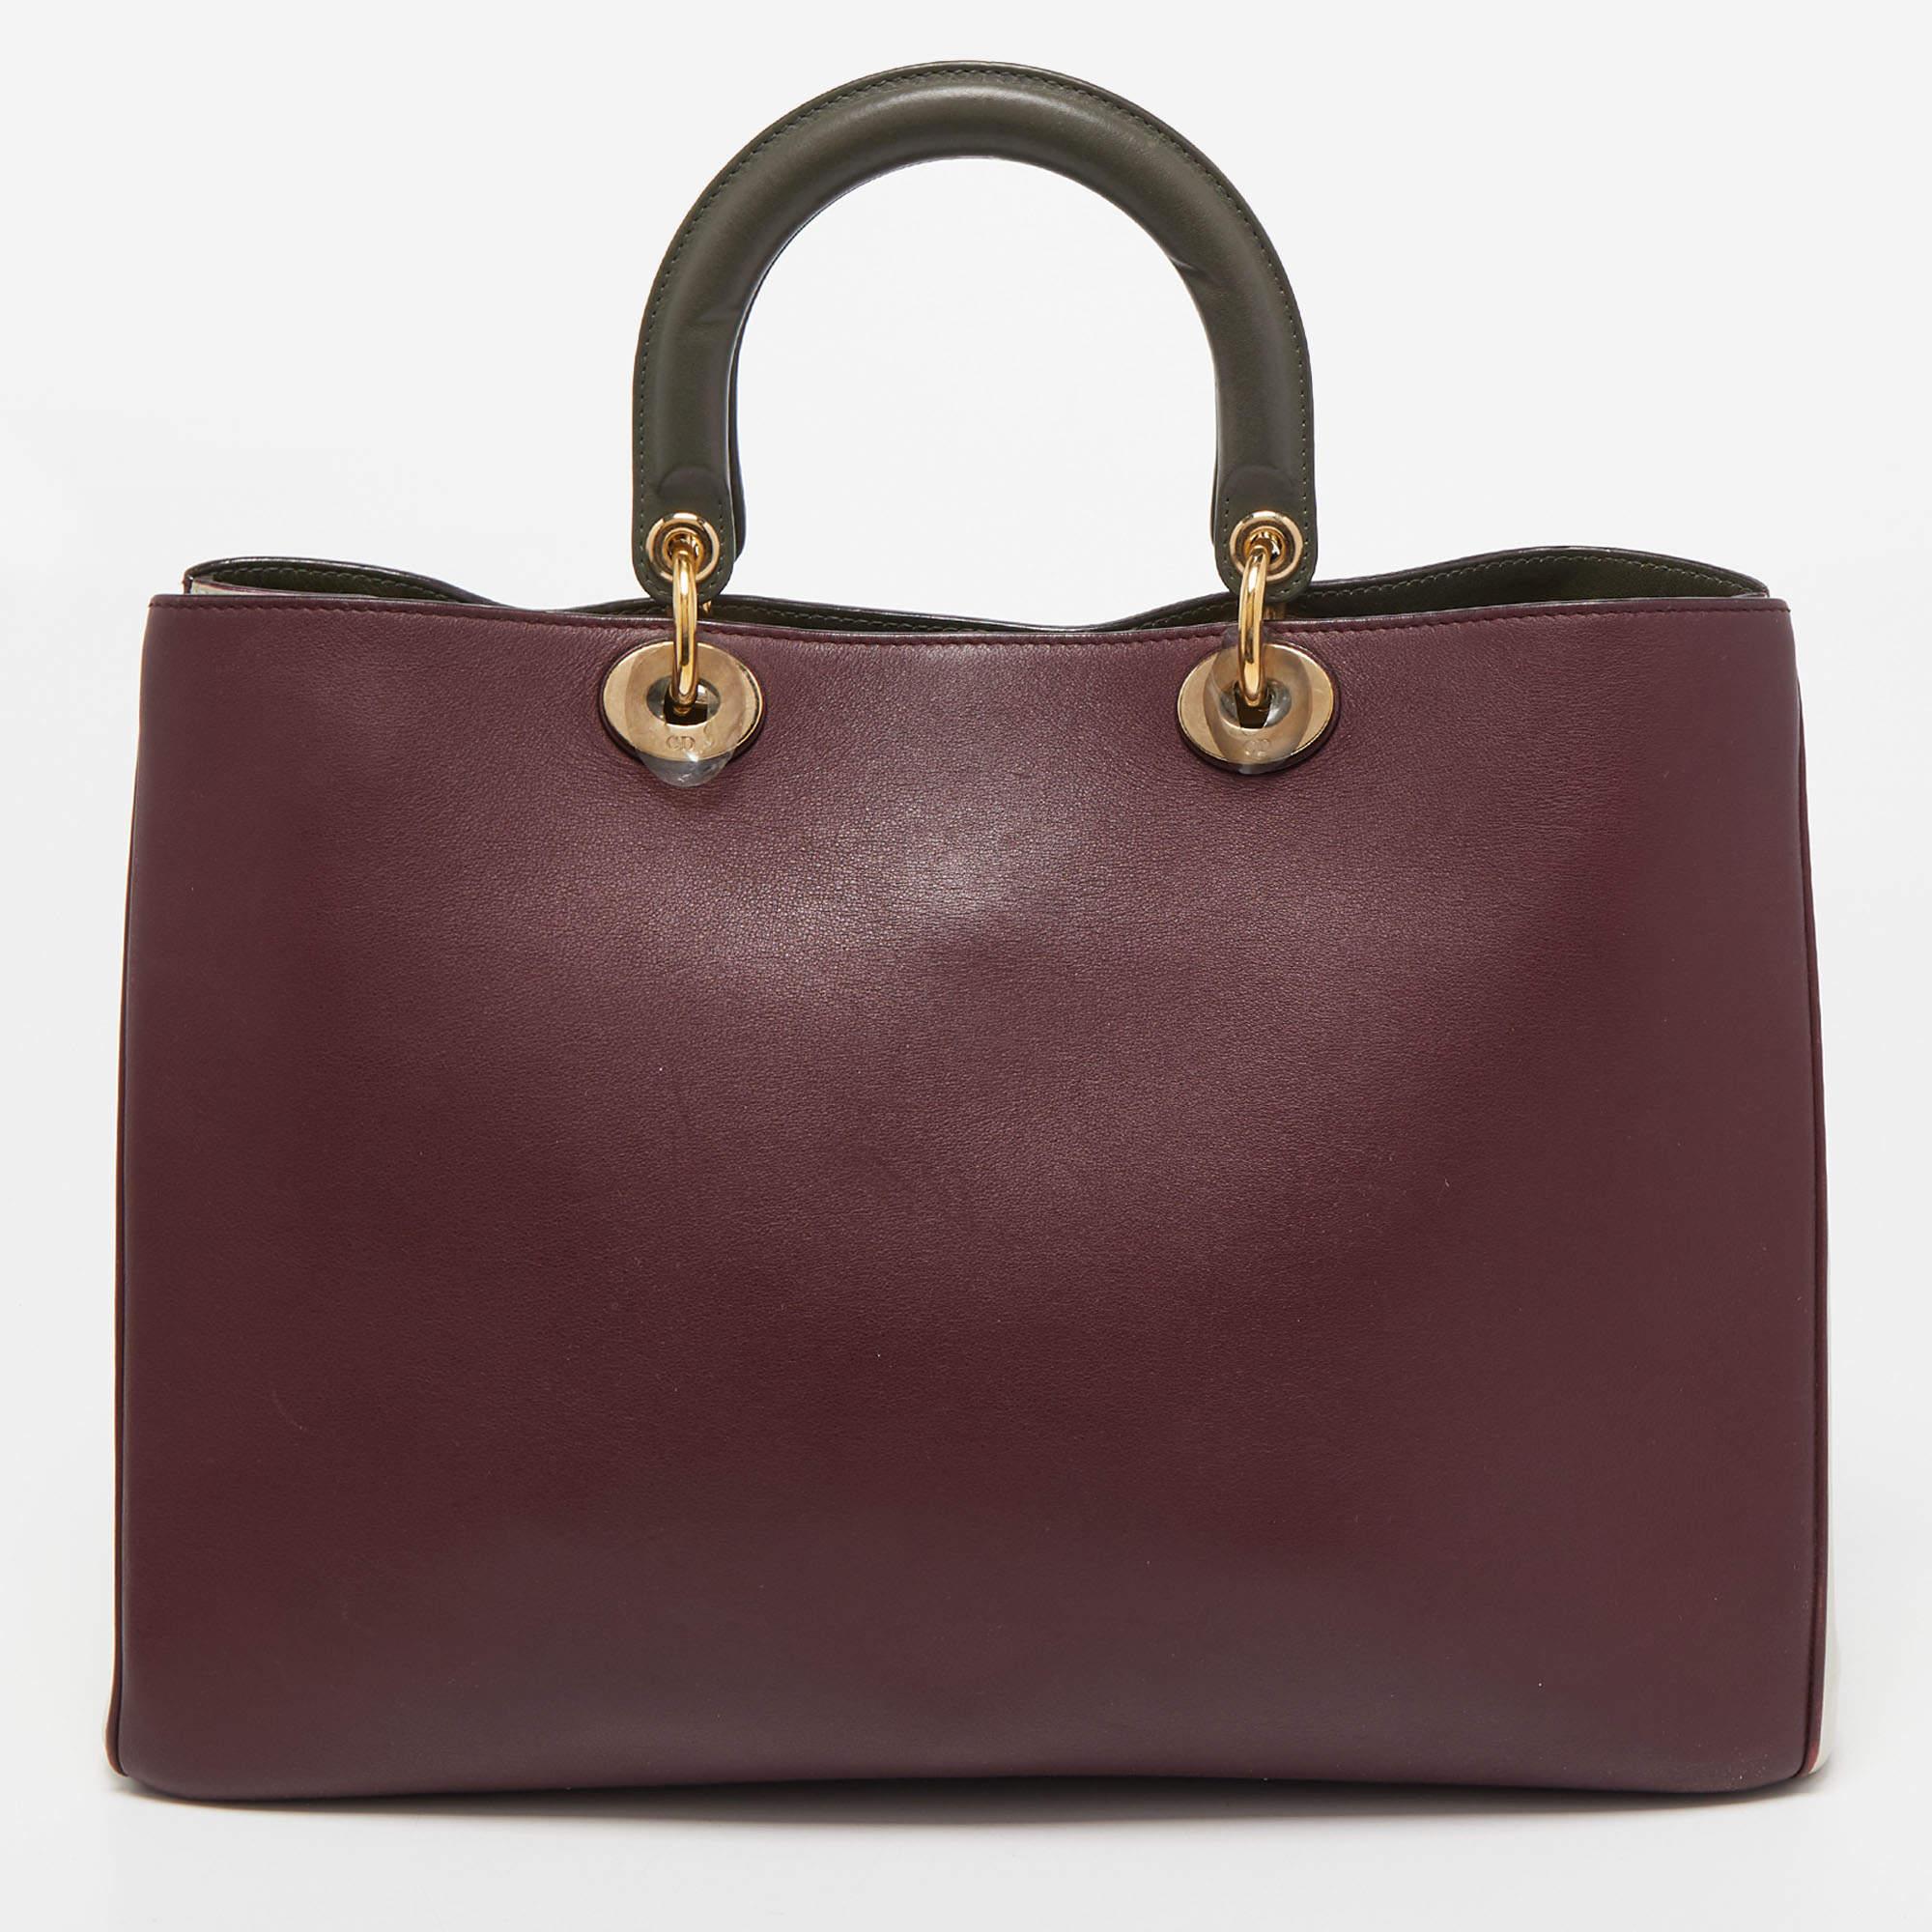 This Diorissimo Shopper tote from the House of Dior will help you keep your belongings safely and stylishly. It is made using leather on the exterior and is highlighted with D.I.O.R charms on the front. It features dual handles, a shoulder strap,